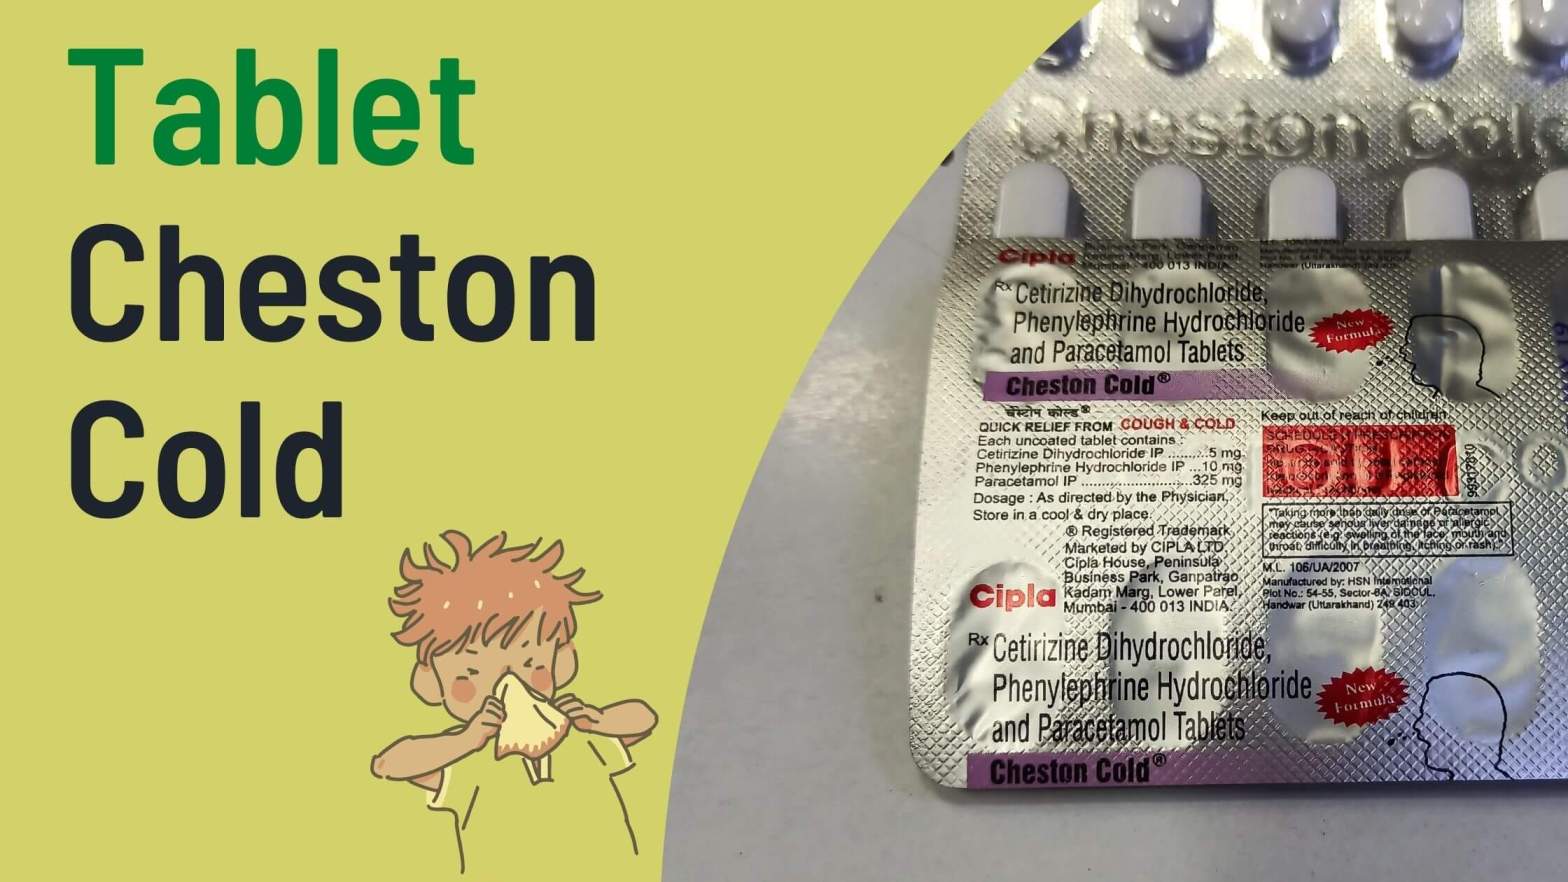 Uses of Tablet Cheston Cold